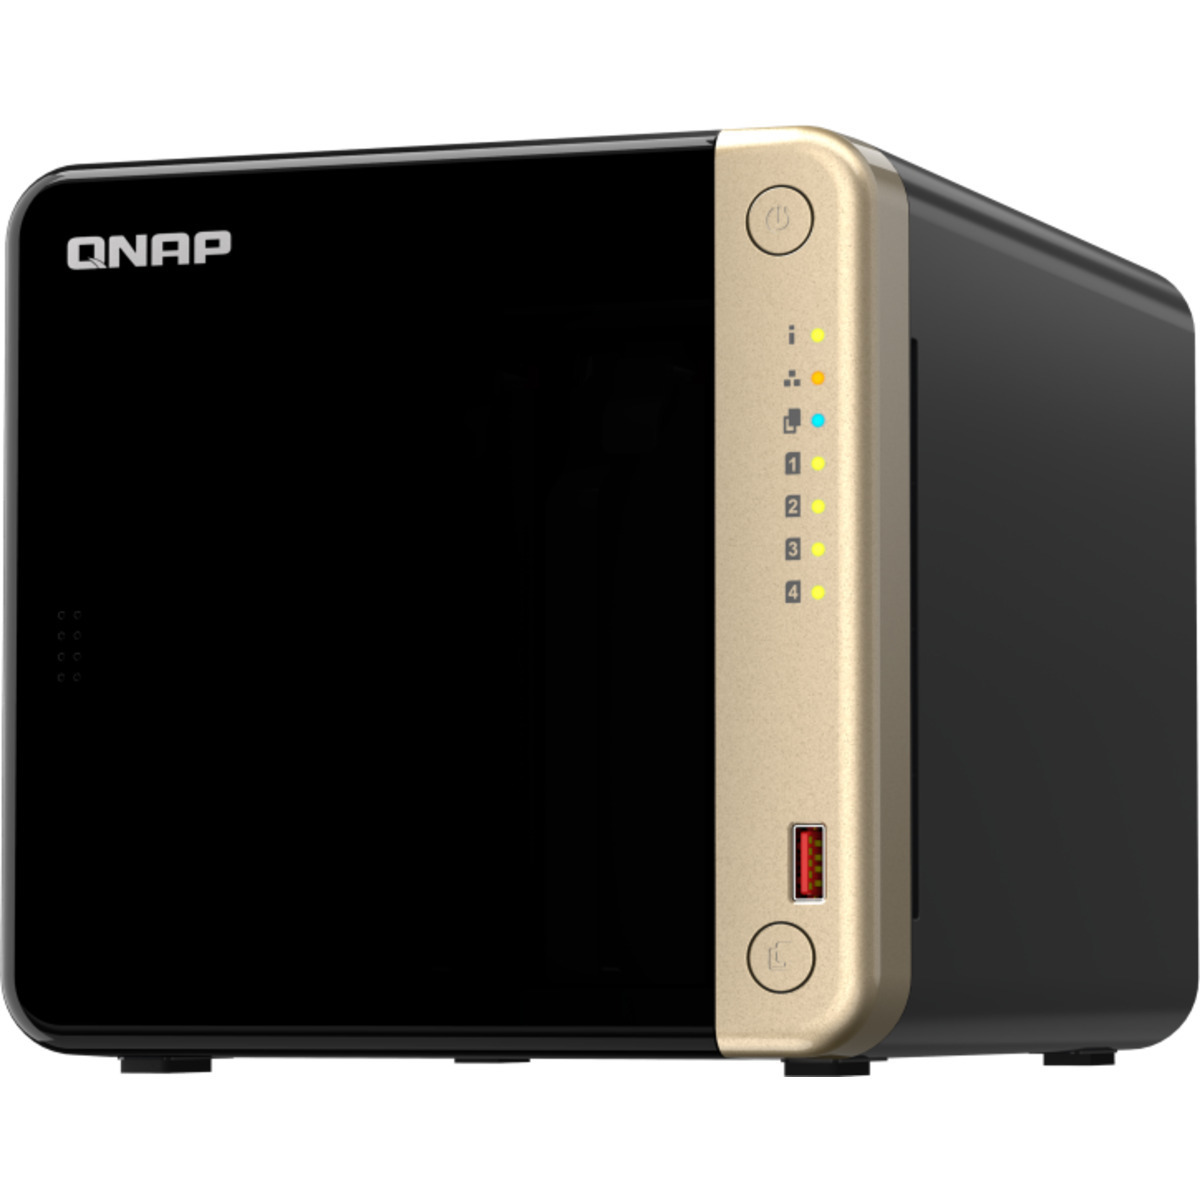 QNAP TS-464 32tb 4-Bay Desktop Multimedia / Power User / Business NAS - Network Attached Storage Device 4x8tb Western Digital Red Pro WD8003FFBX 3.5 7200rpm SATA 6Gb/s HDD NAS Class Drives Installed - Burn-In Tested TS-464